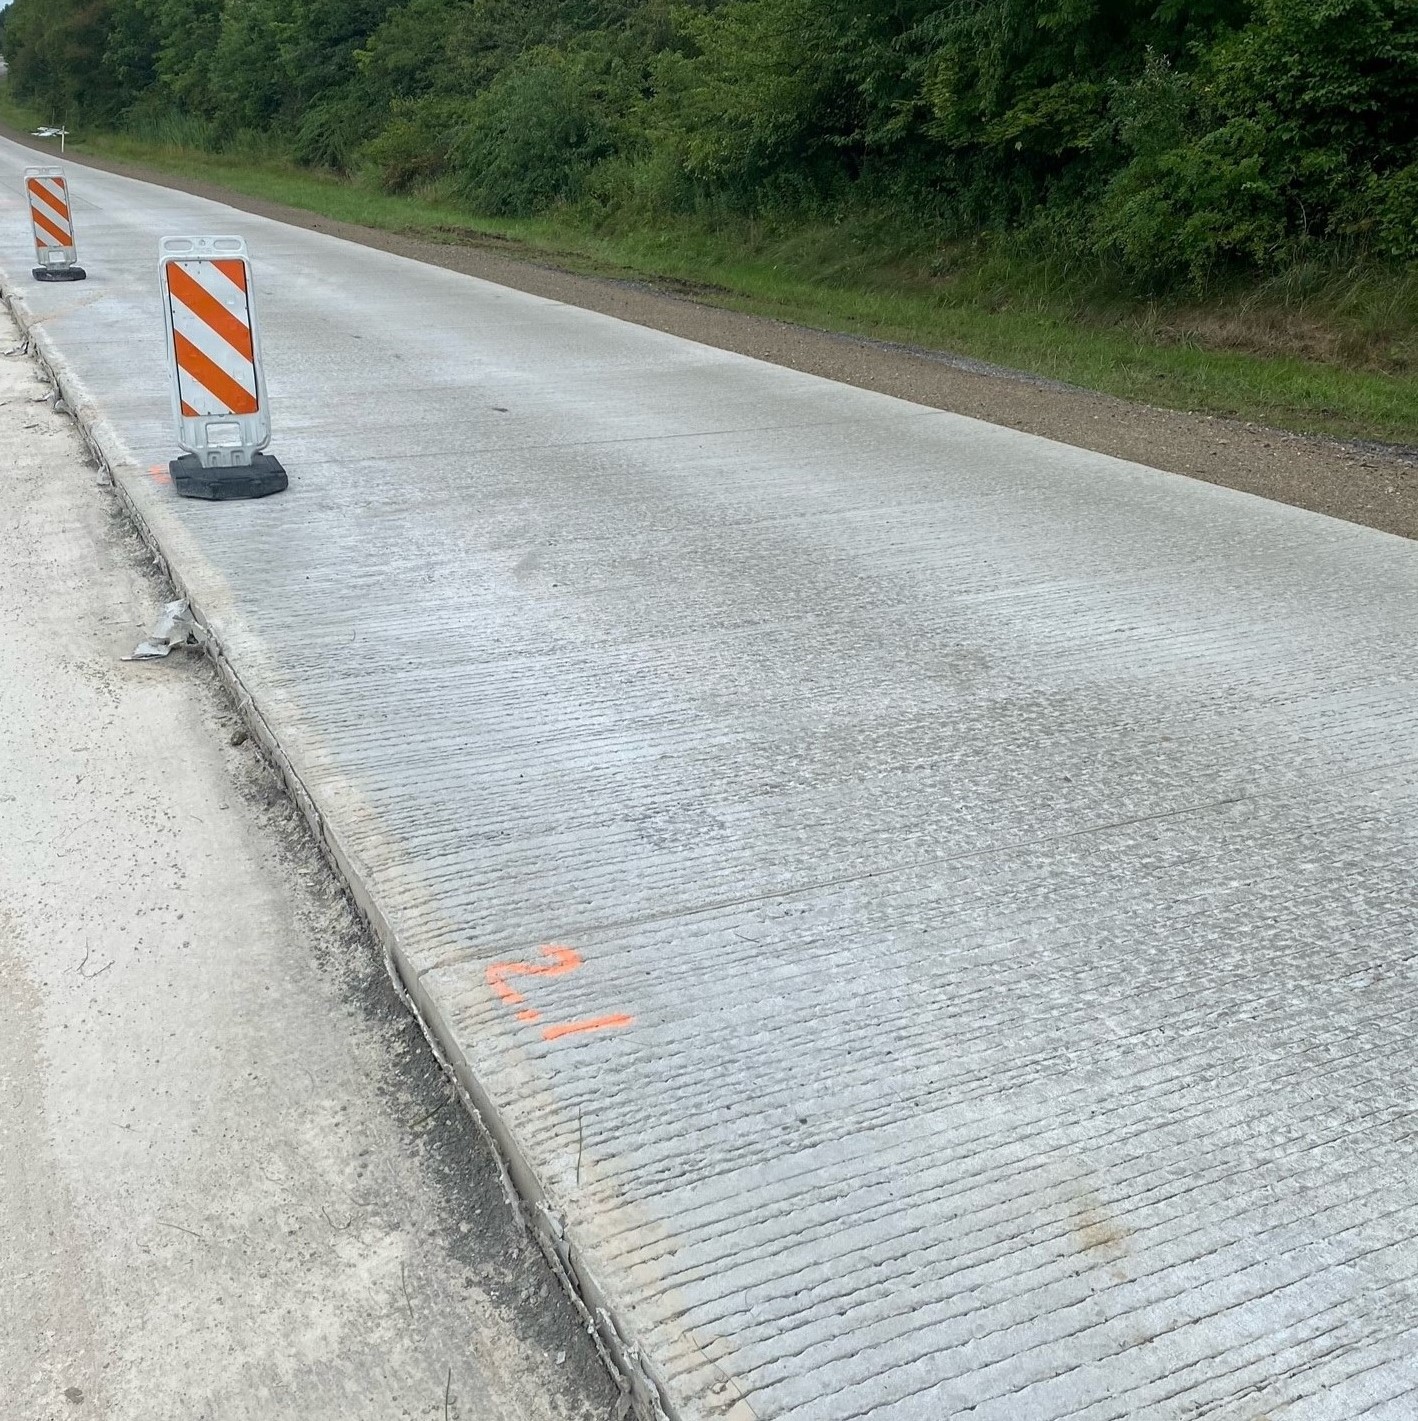 An image of a tree-lined roadway with a line of orange and white work zone barricades separating the completed right side of the roadway and the left side of the roadway being prepared for the concrete overlay